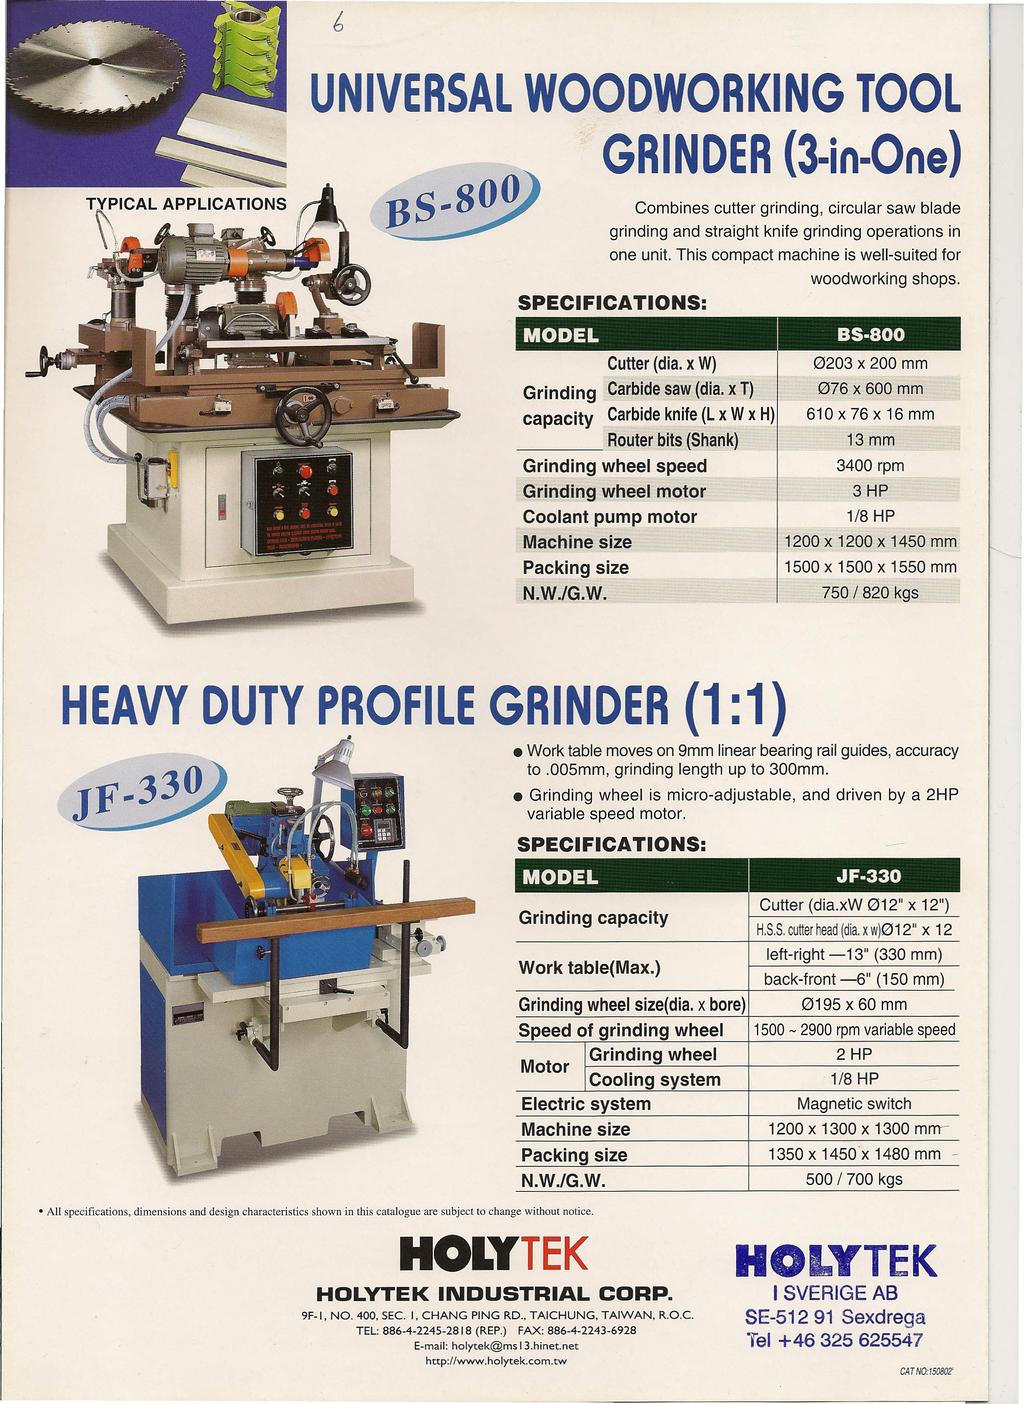 ~ UNIVERSAL WOODWORKING TOOL GRINDER (3-in-One) T~Y~ICAL APPLlCATIONS Combines cutter grinding, circular saw blade grinding and straight knife grinding operations in \0,. one unit.